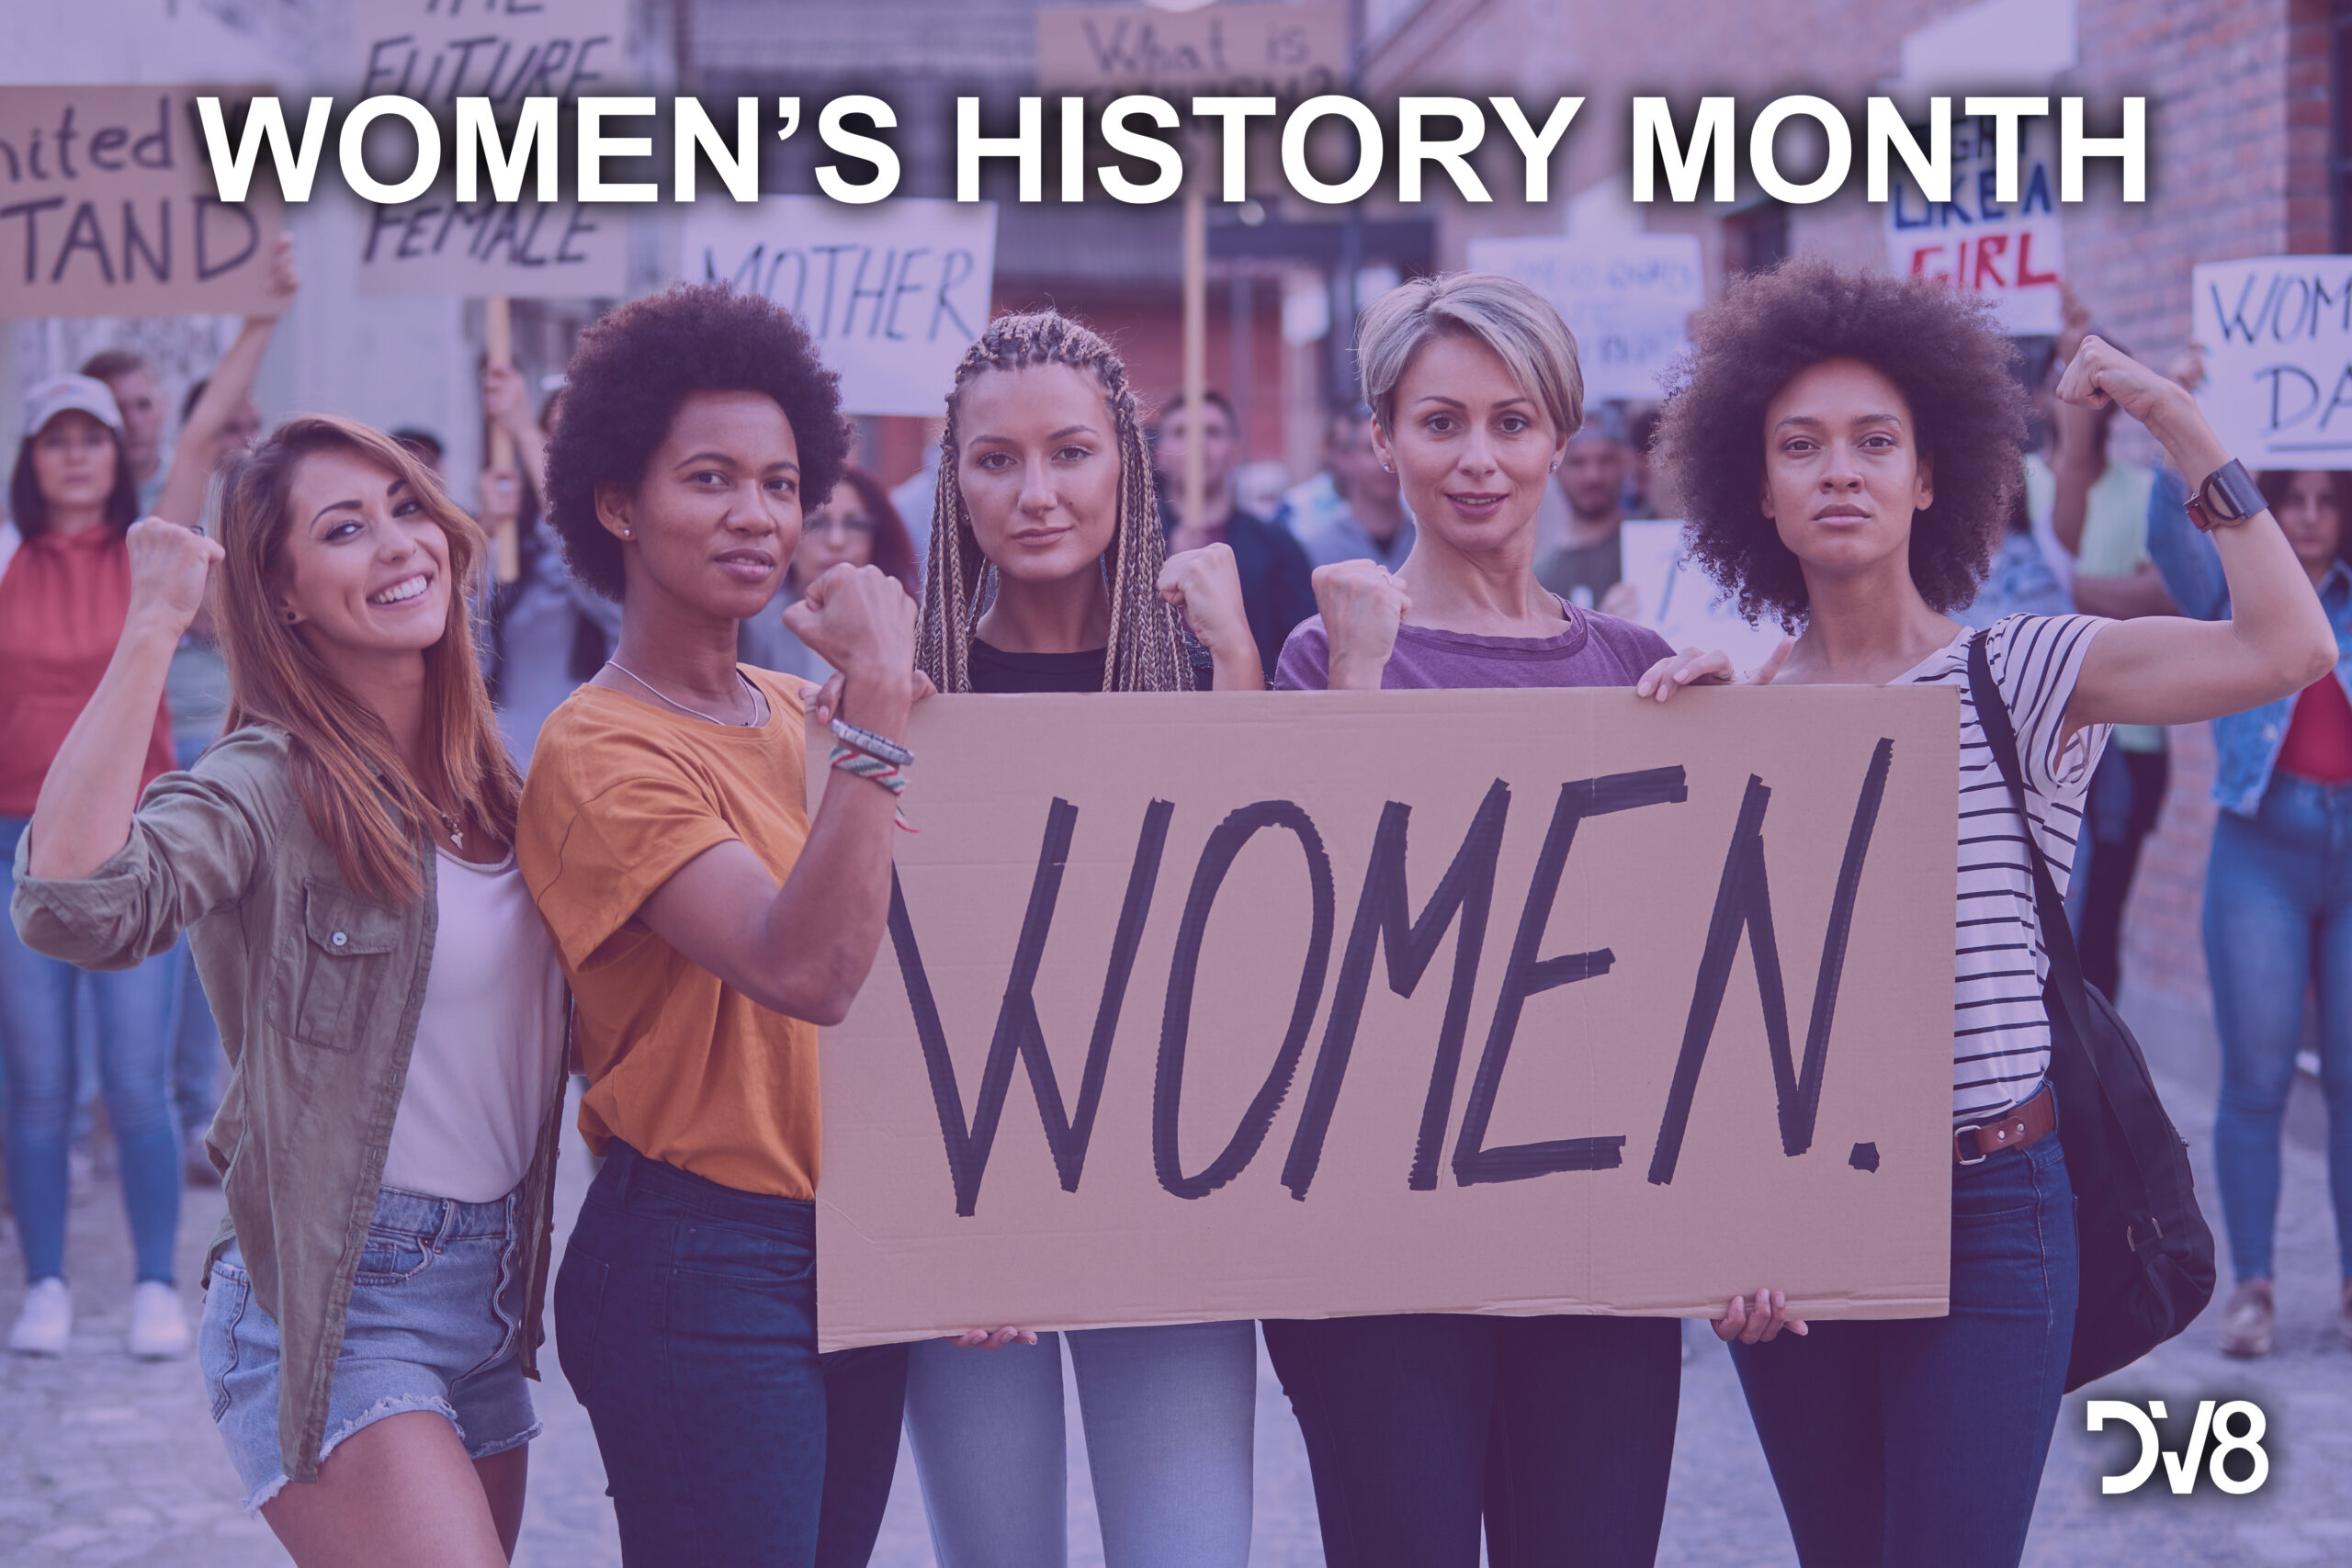 Celebrating Women’s History Month 2023 by Recognizing the Contributions of Women